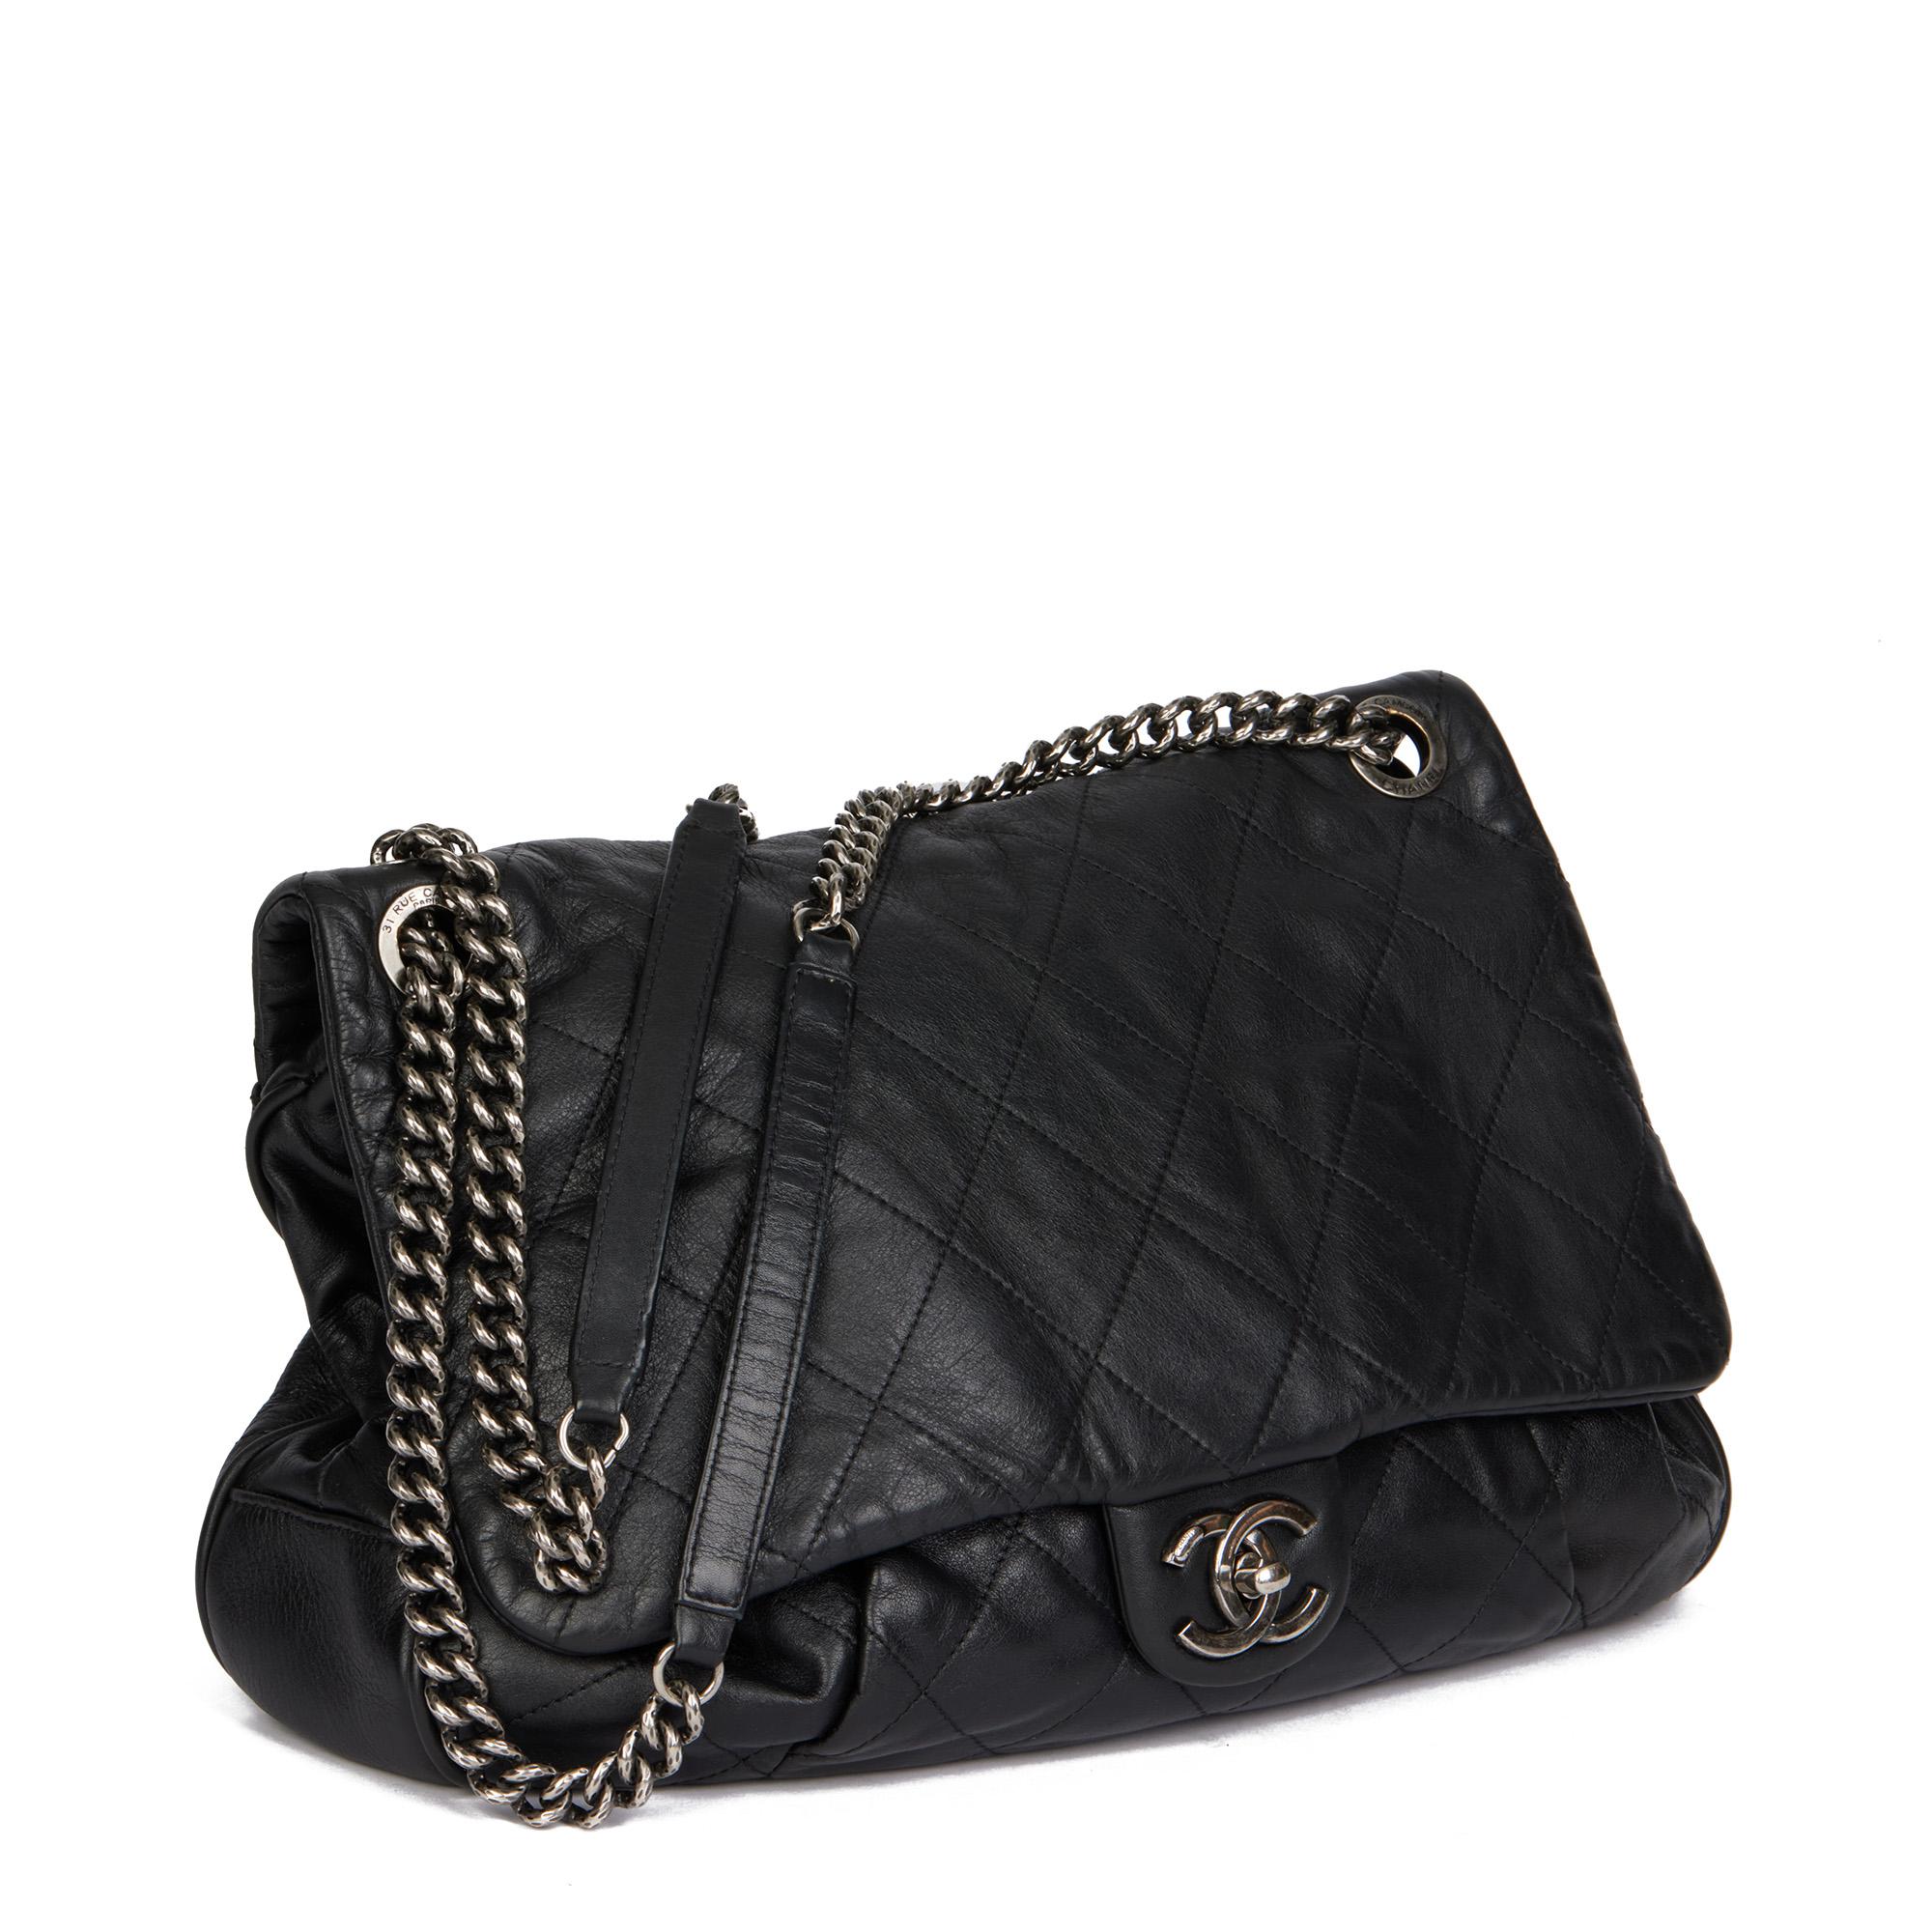 CHANEL
Black Quilted Lambskin Coco Pleats Flap Bag

Xupes Reference: HB4506
Serial Number: 17071534
Age (Circa): 2012
Accompanied By: Chanel Dust Bag
Authenticity Details: Serial Sticker (Made in Italy)
Gender: Ladies
Type: Shoulder,